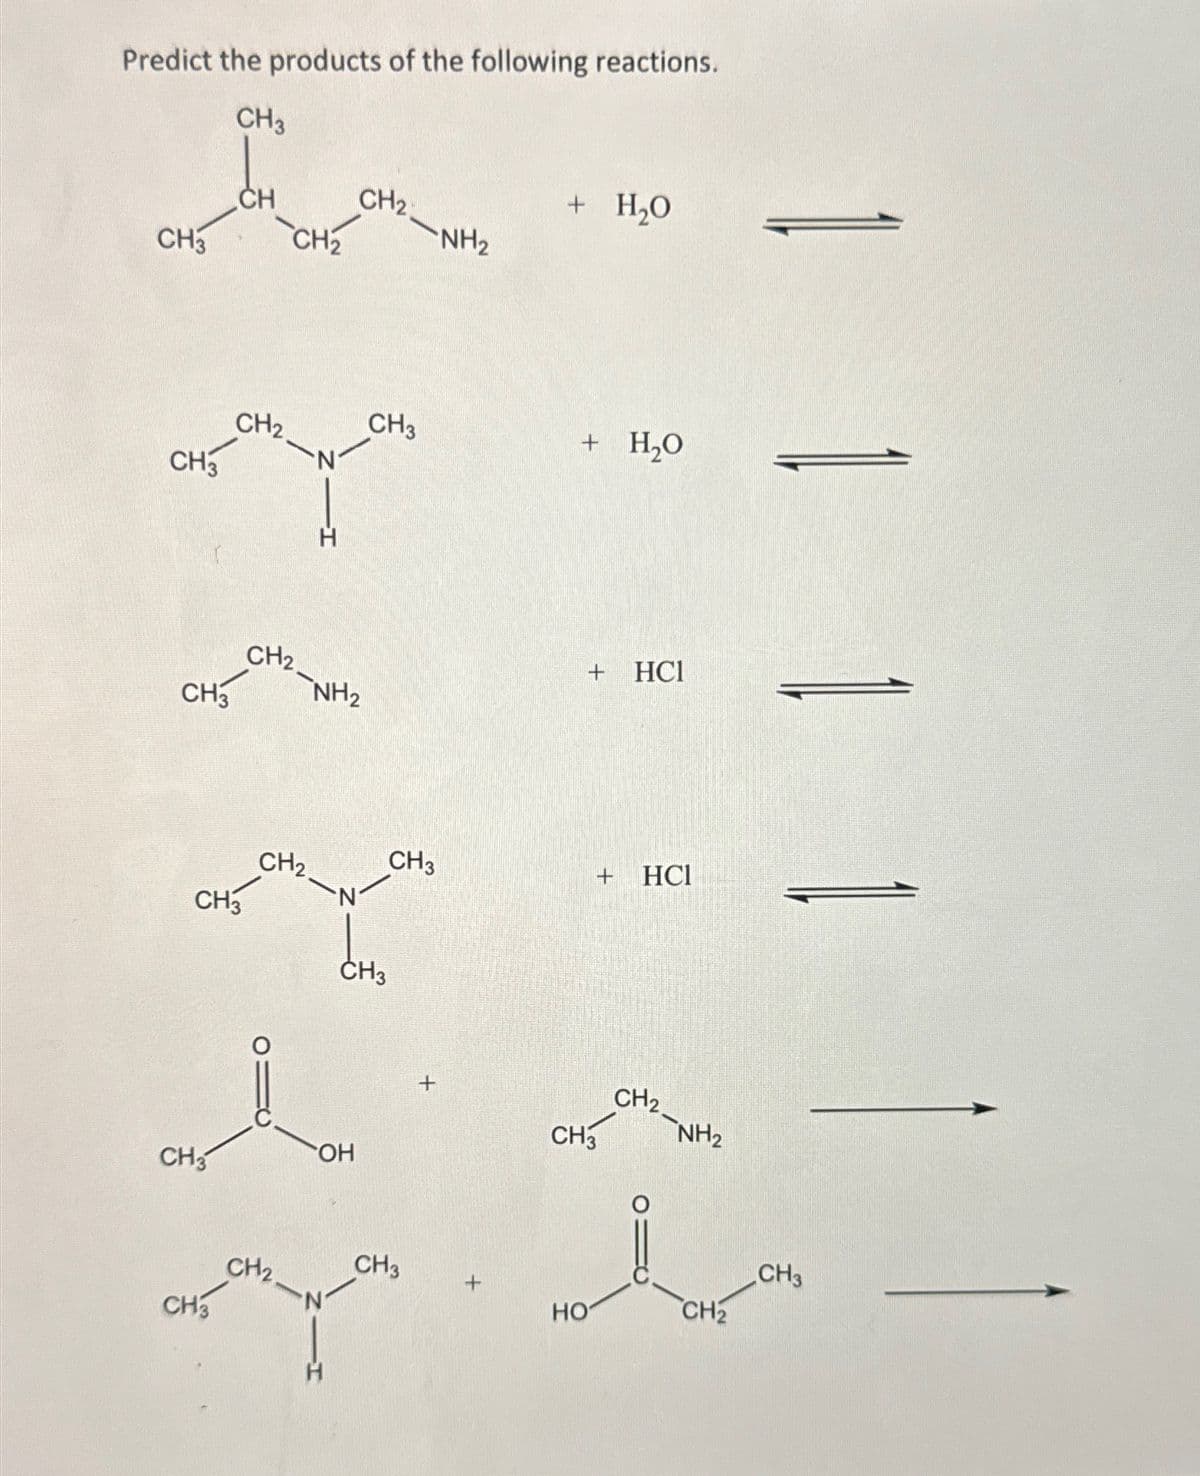 Predict the products of the following reactions.
CH3
CH3
CH
CH2
-NH2
-CH2
+ H₂O
CH3
+ H₂O
CH2
N
CH3
1 1 1
CH2
+
HCI
CH3
NH2
CH2
CH3
+
HCI
CH3
CH3
CH3
OH
+
CH2
CH3
NH2
CH2
CH3
CH3
HO
CH2
CH3